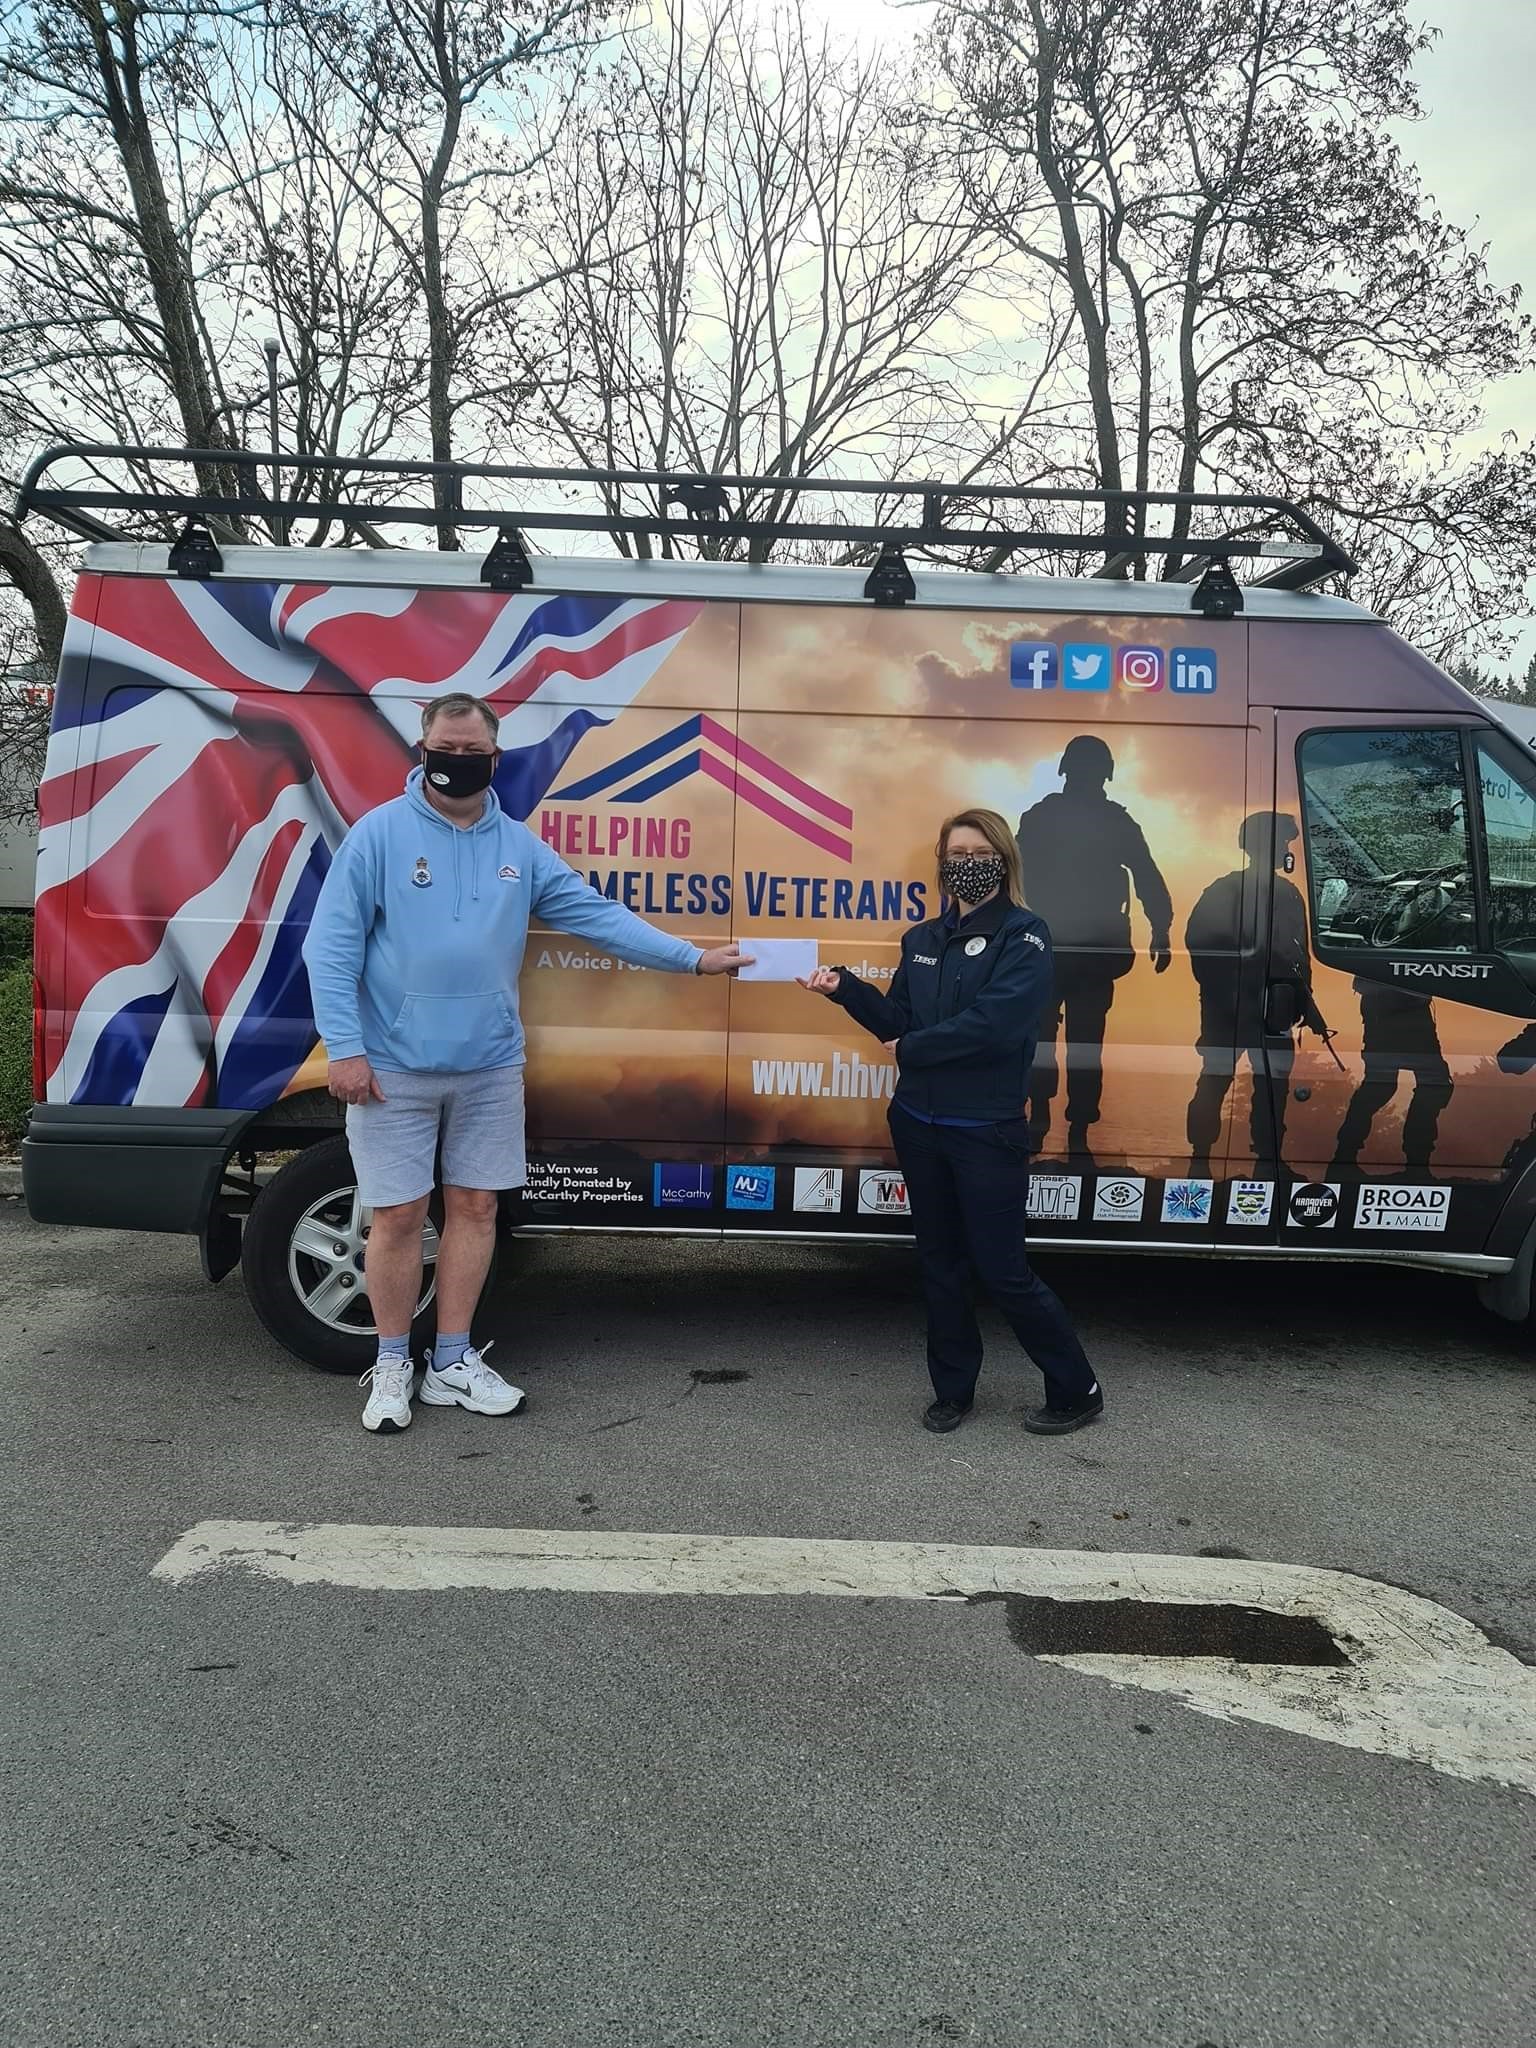 Dave Wood set up Helping Homeless Veterans UK just before the pandemic struck 